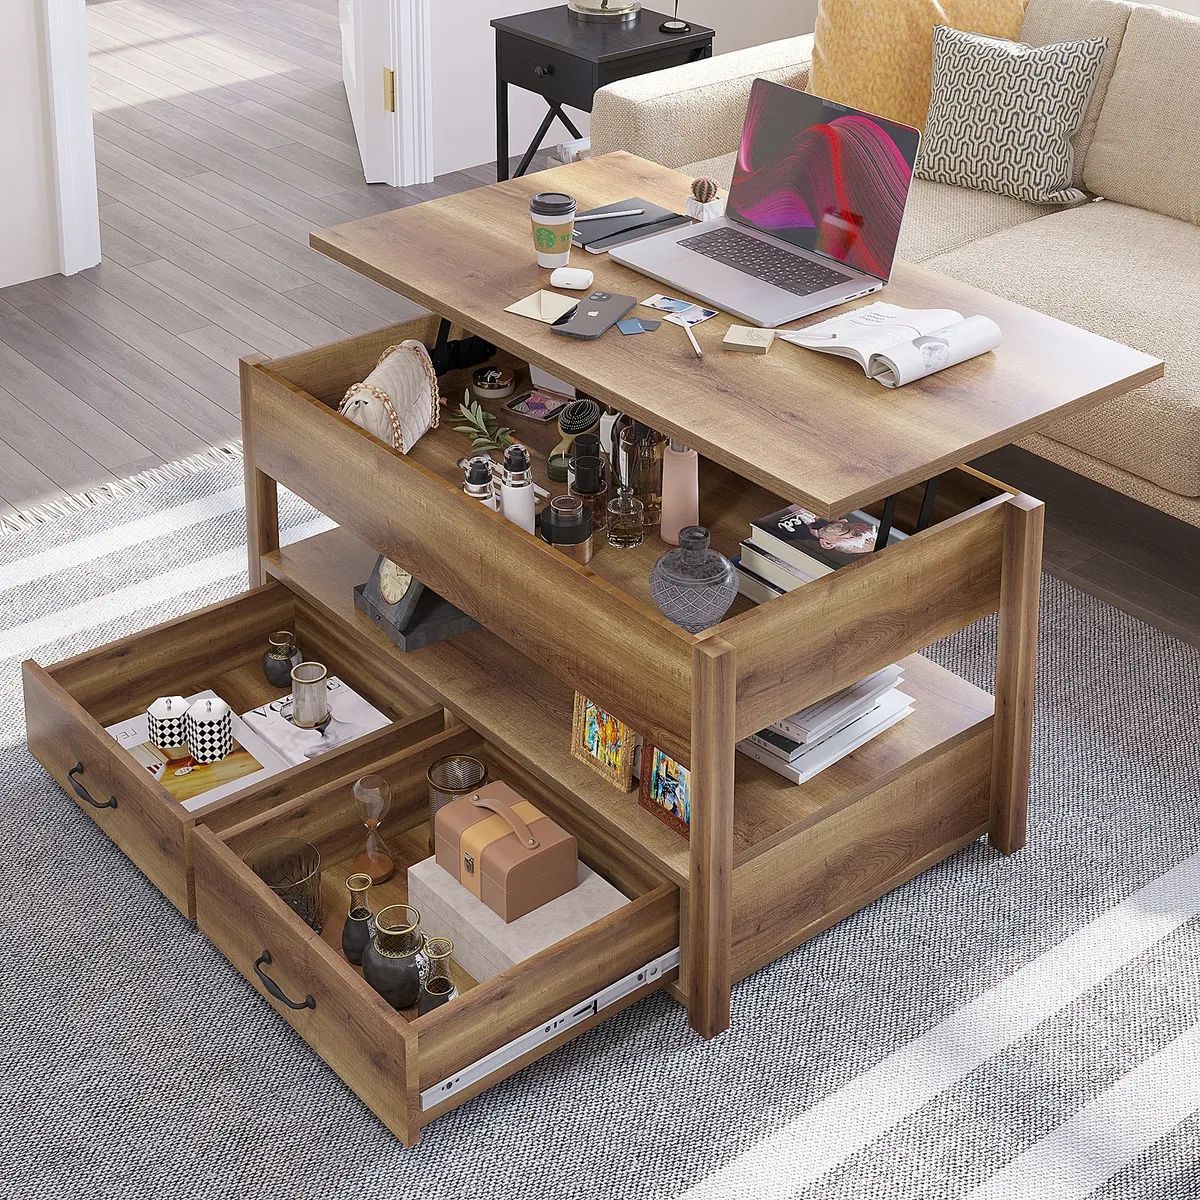 2 Drawer Lift Top Coffee Table Wooden With Hidden Compartment & Storage  Shelves | Ebay Throughout Lift Top Coffee Tables With Shelves (Photo 5 of 15)